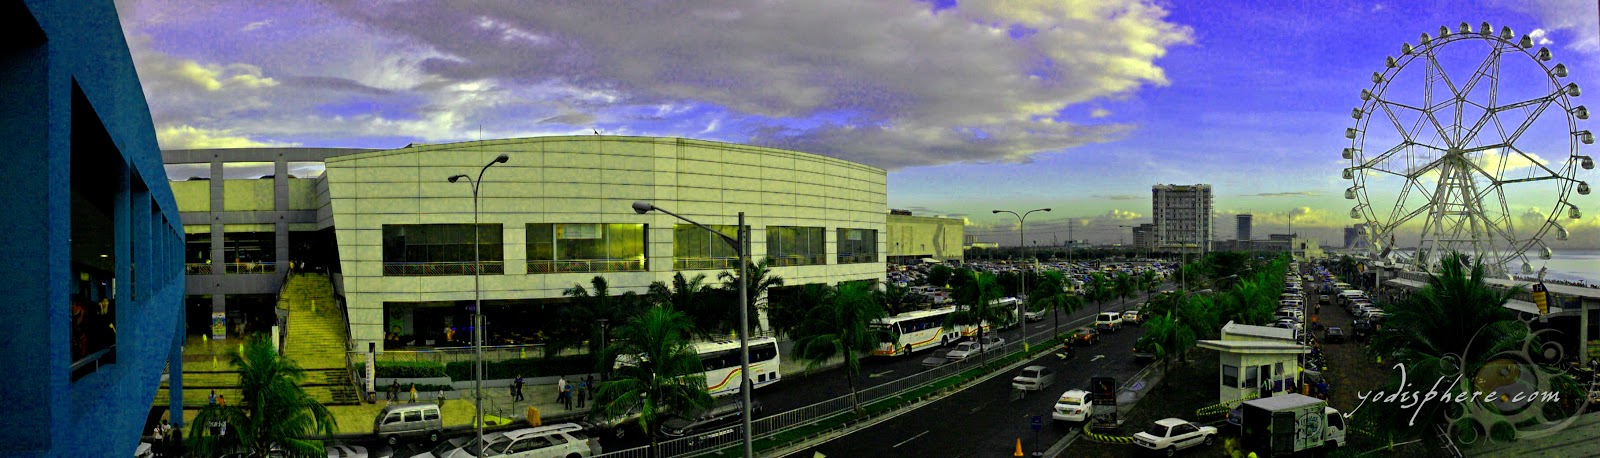 Panoramic view of SM Mall of Asia and its giant ferries wheel